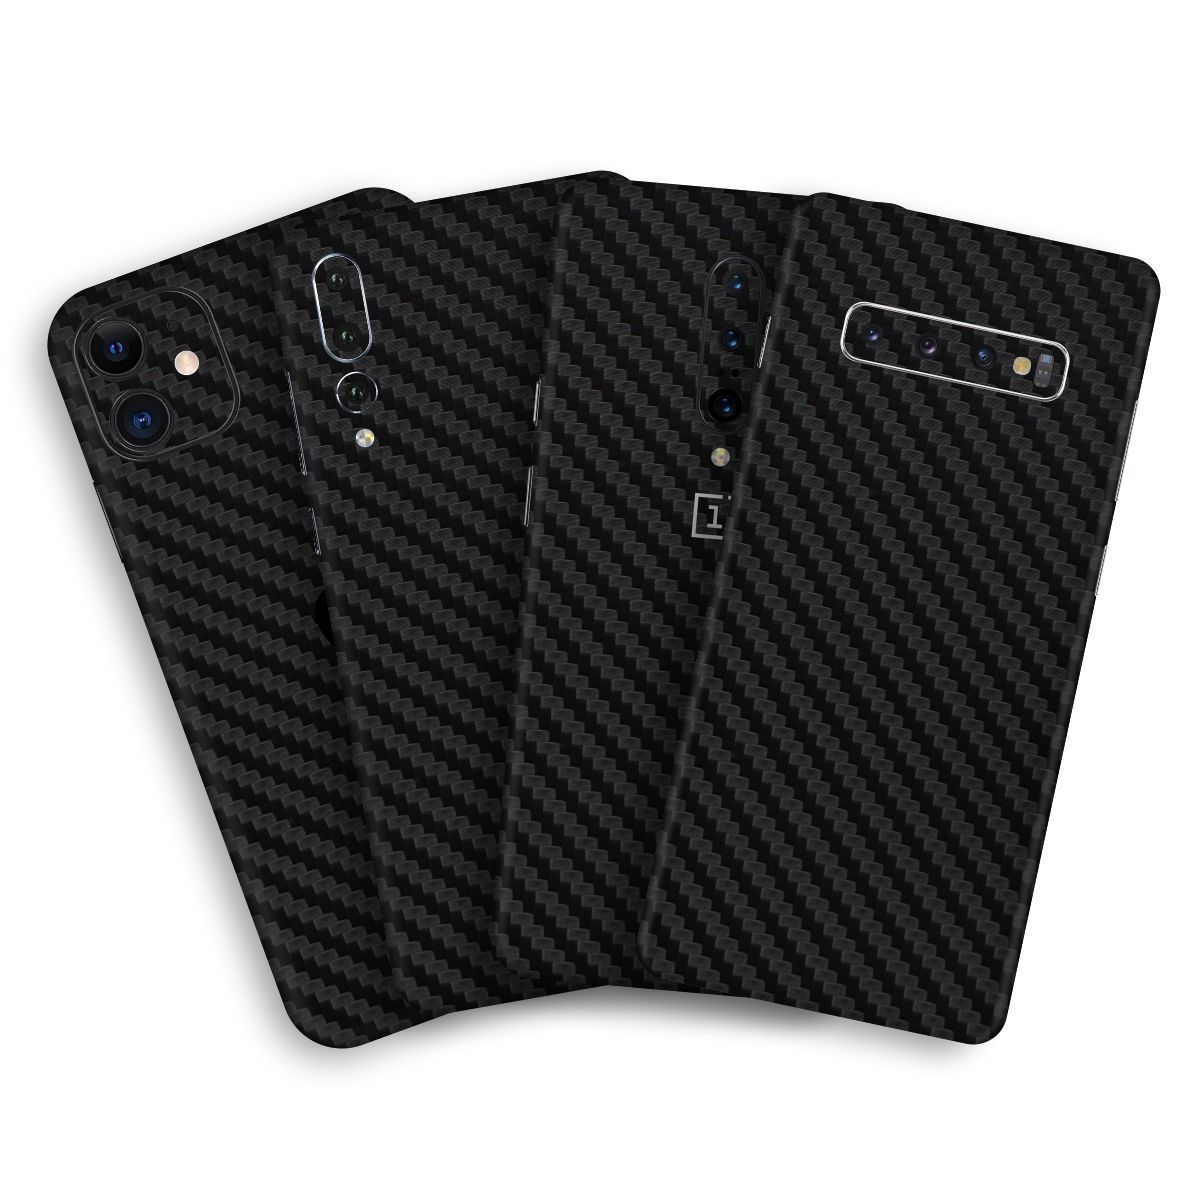 Black Carbon Mobile Skin / Mobile Wrap for Samsung Galaxy Note 8